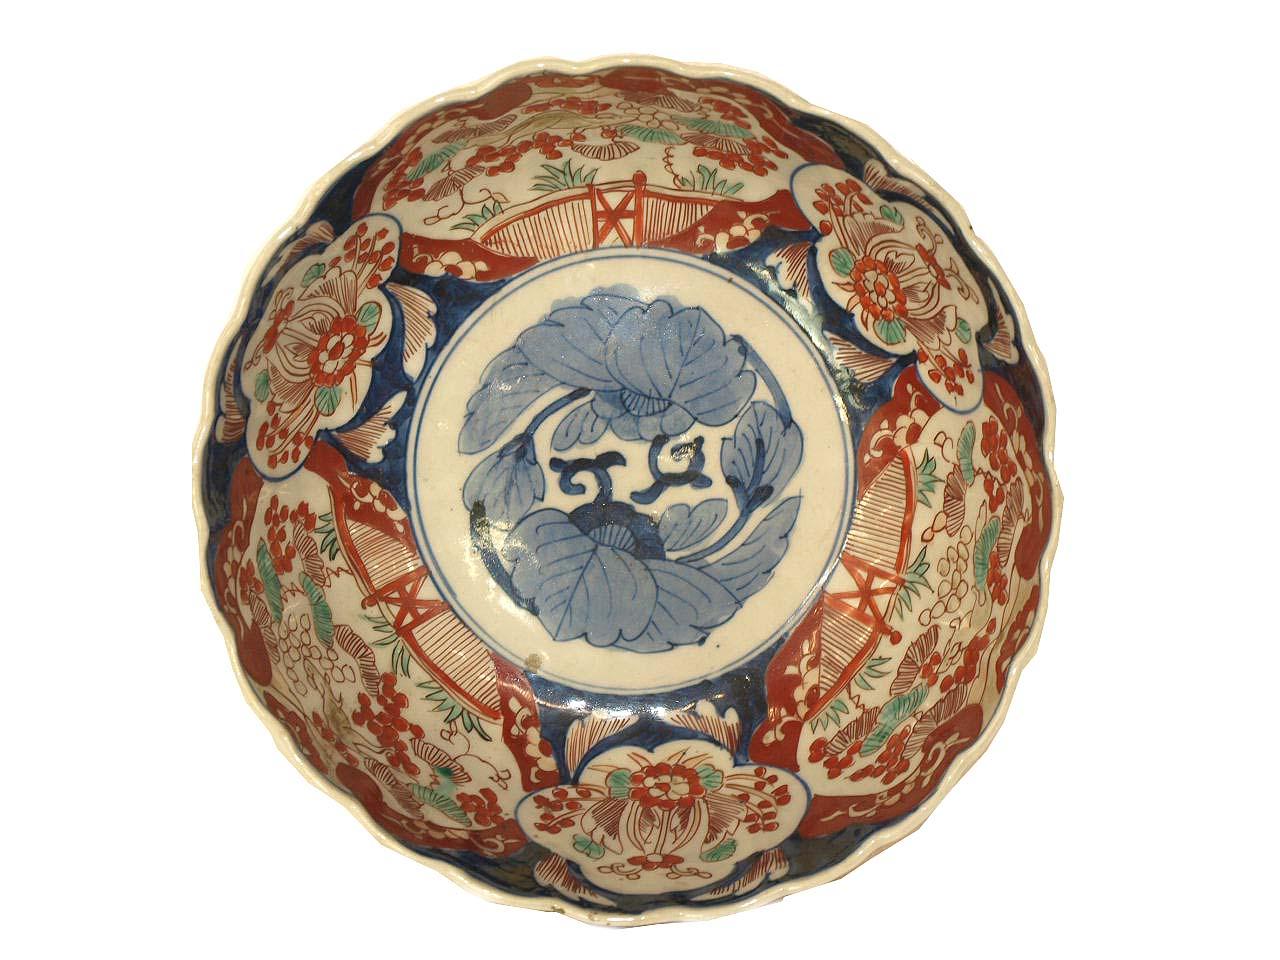 Japanese Imari bowl, with red, blue and teal colors, the center with stylized blue flowers, and various scenes on the interior and exterior featuring an inquisitive rabbit, flowers and foliate. The base diameter is 6 inches, in very good condition.